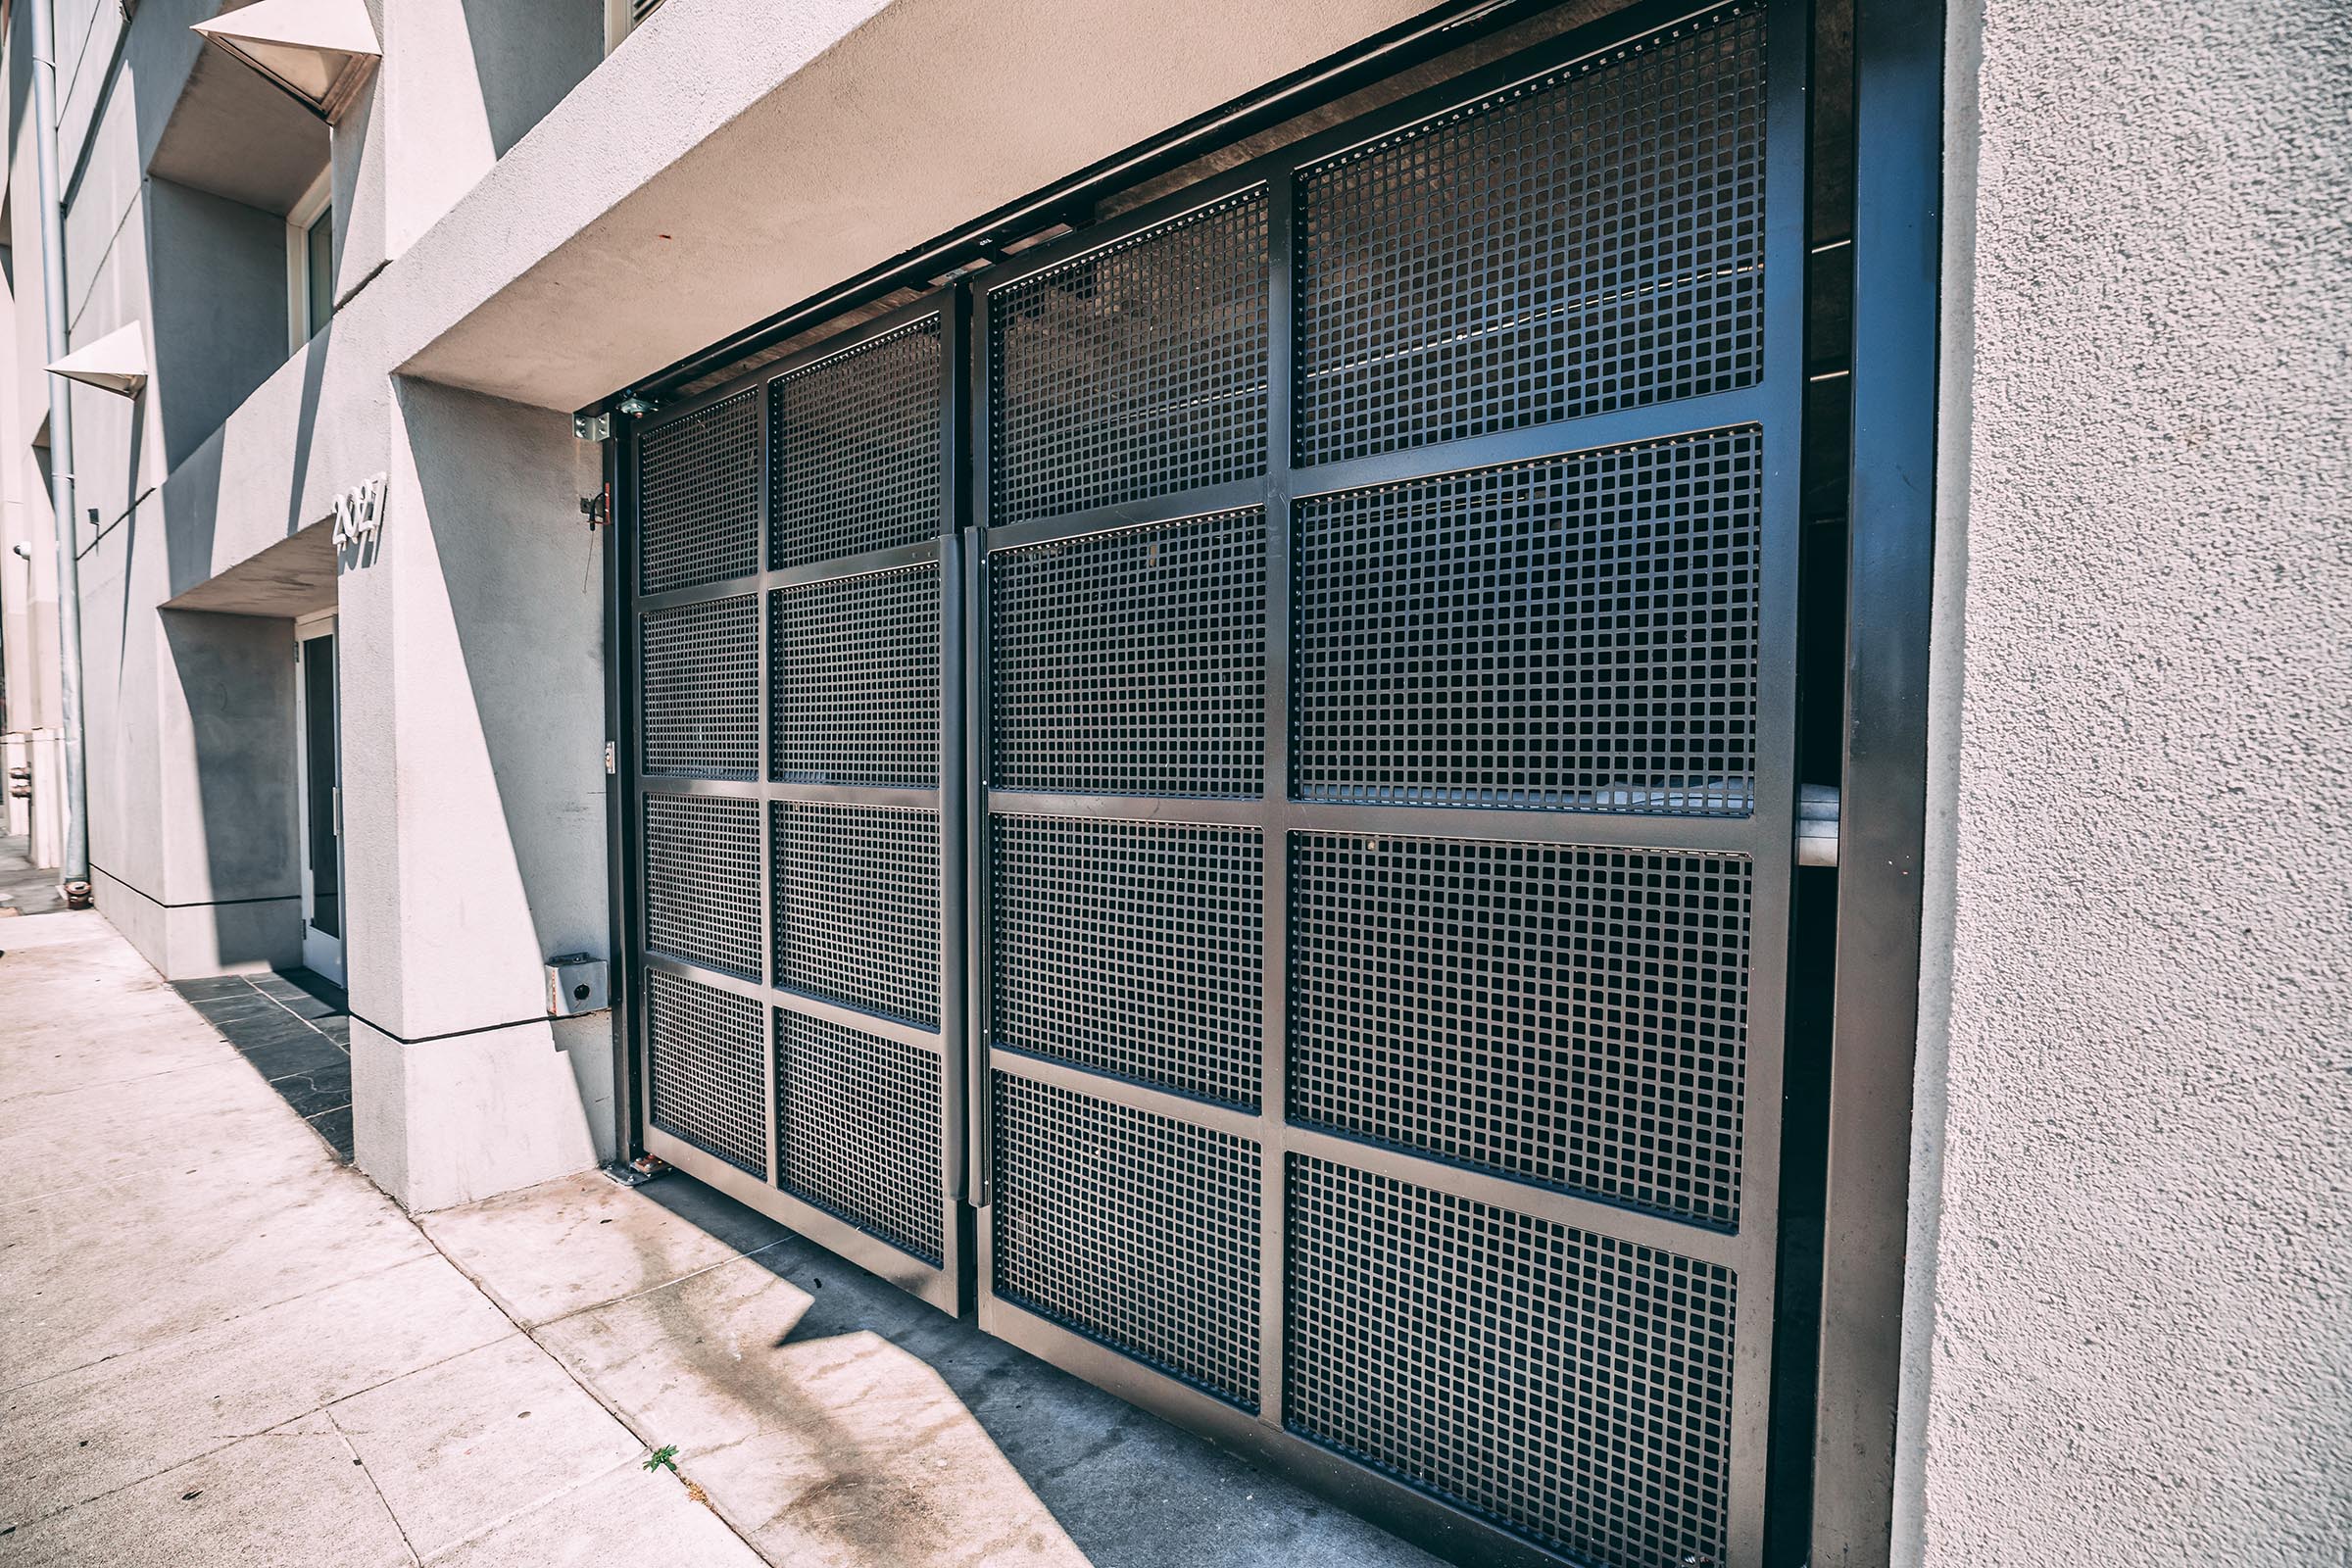 Commercial automatic security gates installed on San Francisco building